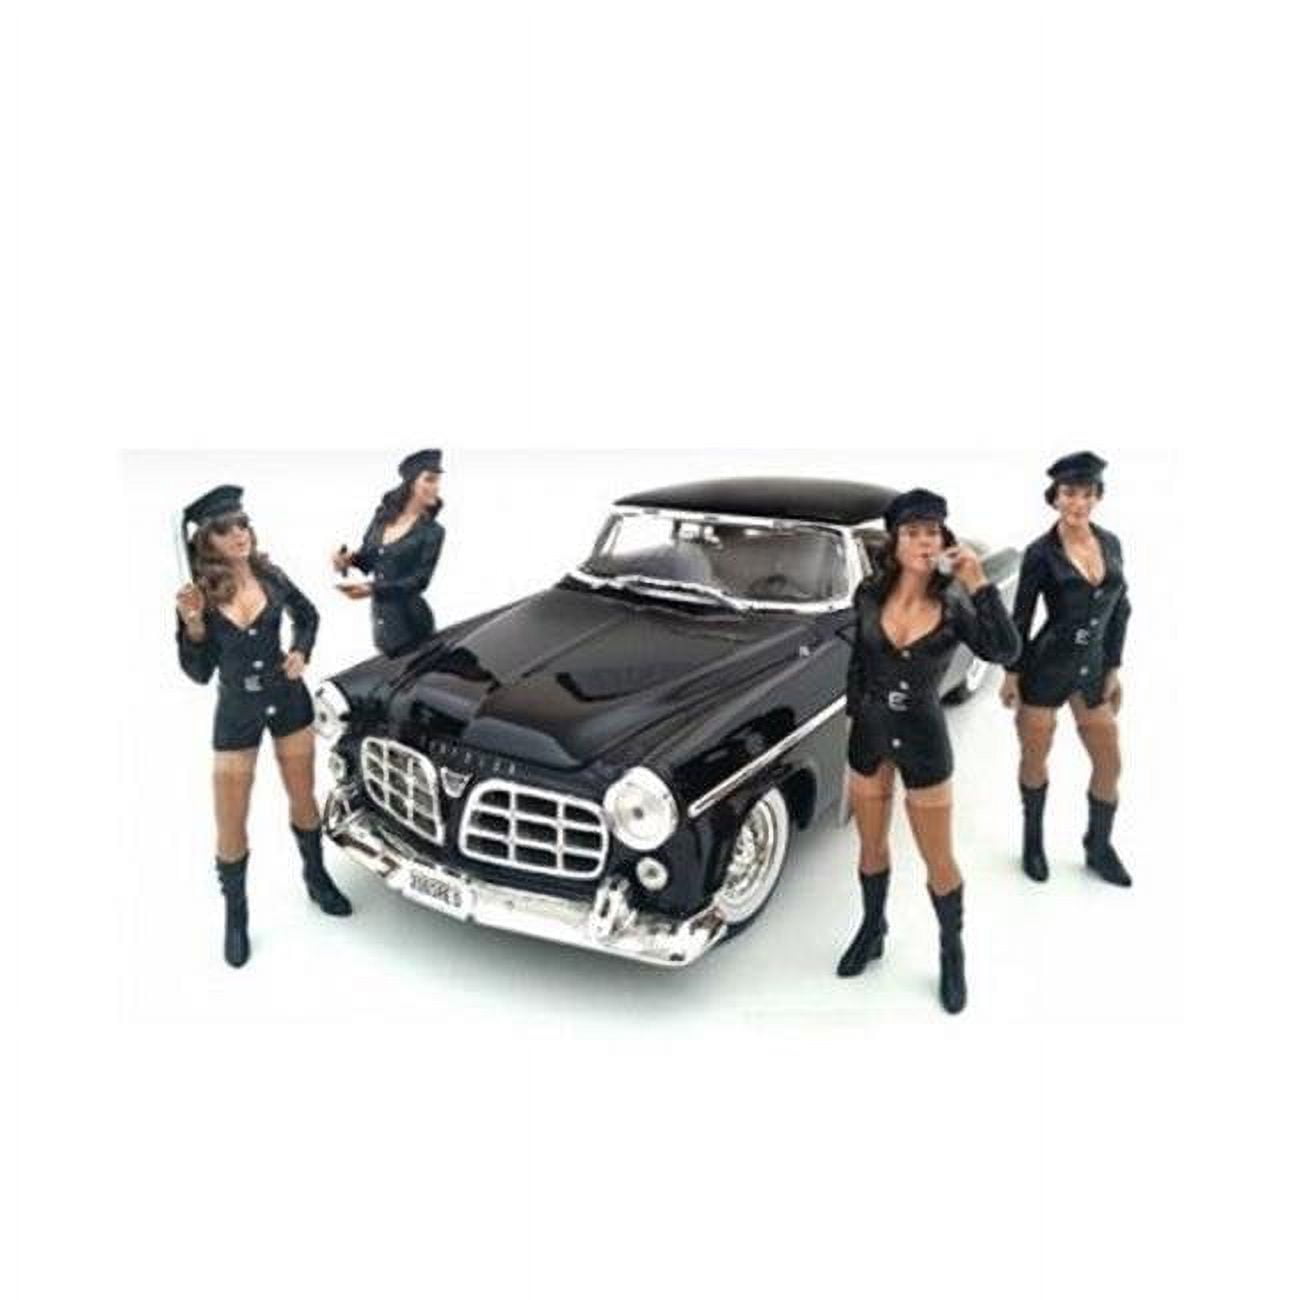 23869-23870-23871-23872 Costume Babes Figure Set For 1-18 Scale Models, 4 Piece